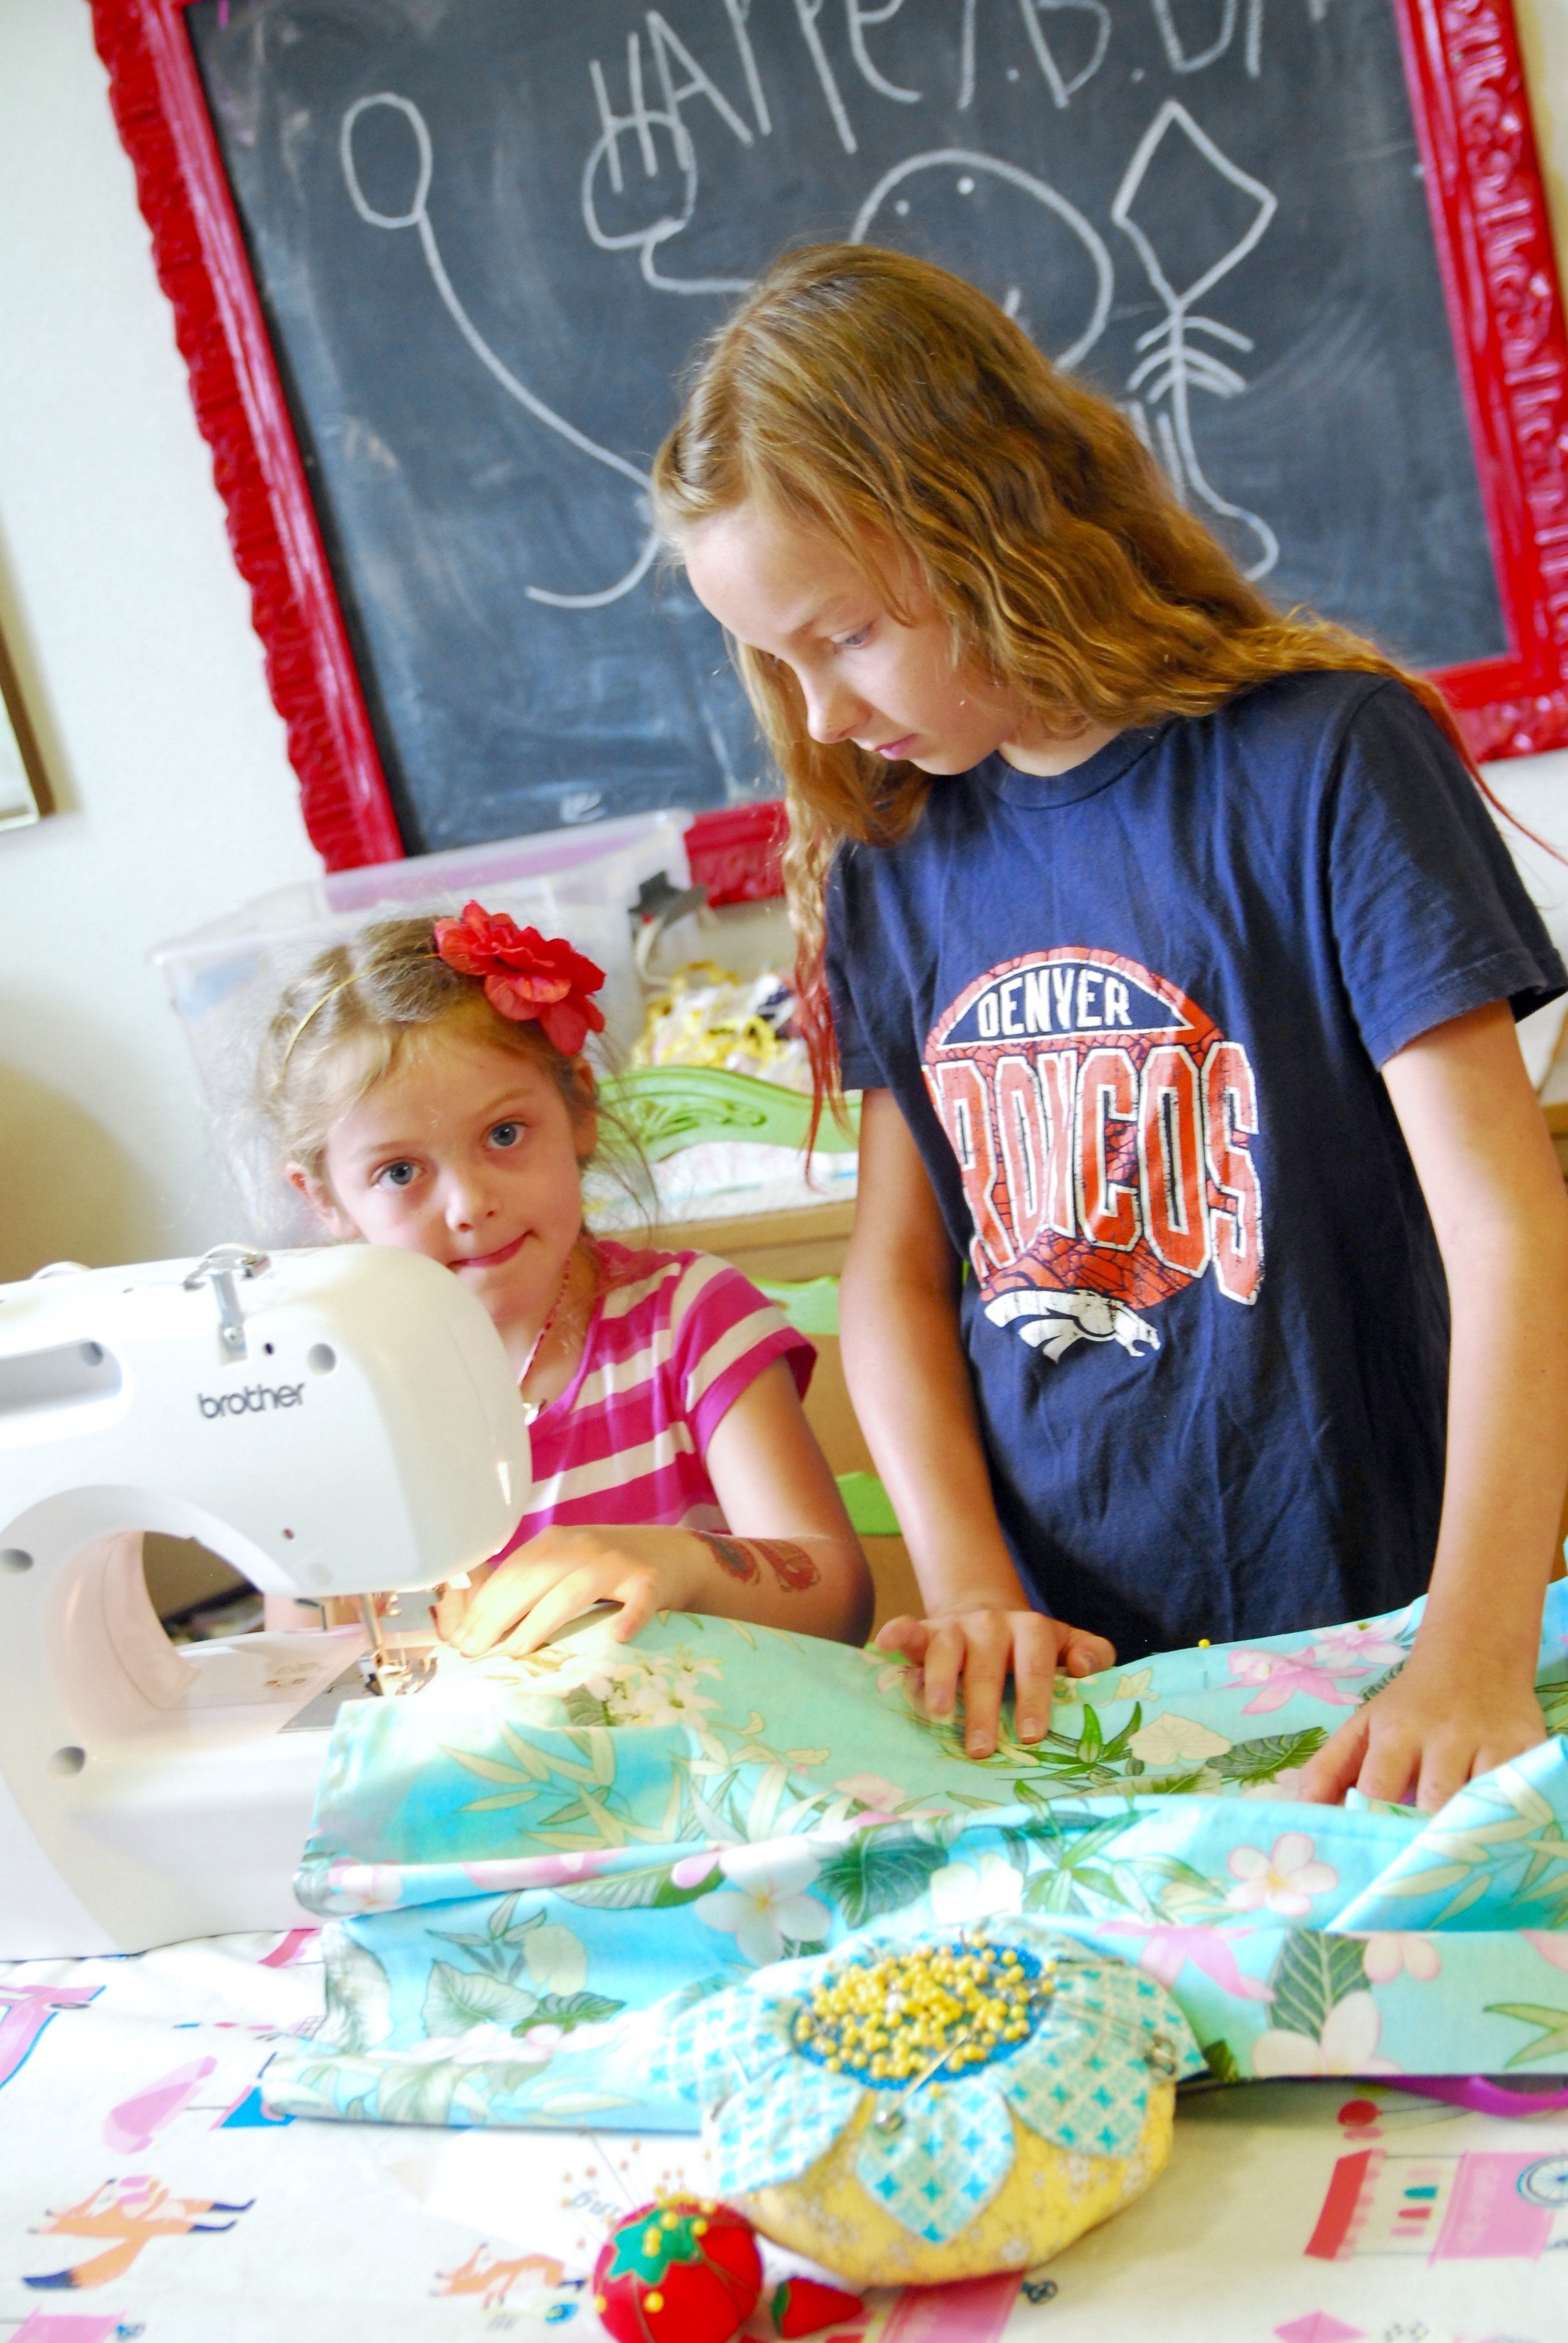 How to Teach Kids Sewing Camps and Classes